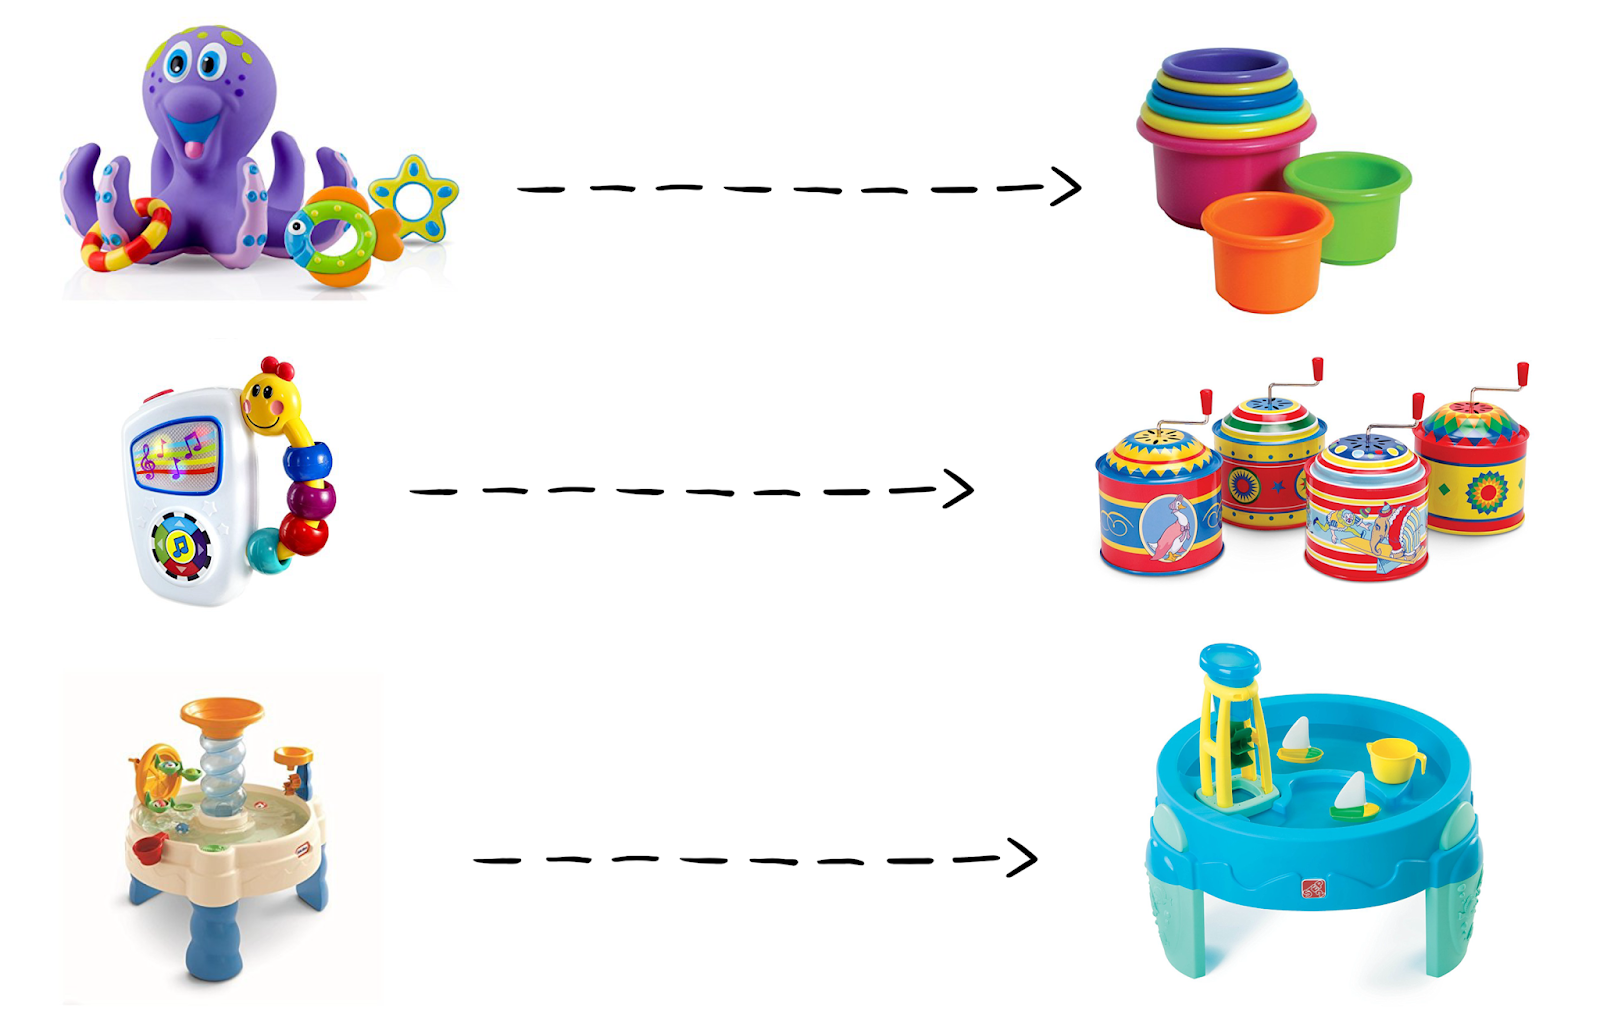 Montessori friendly toy alternatives to popular toddler gifts - for the same or similar price.